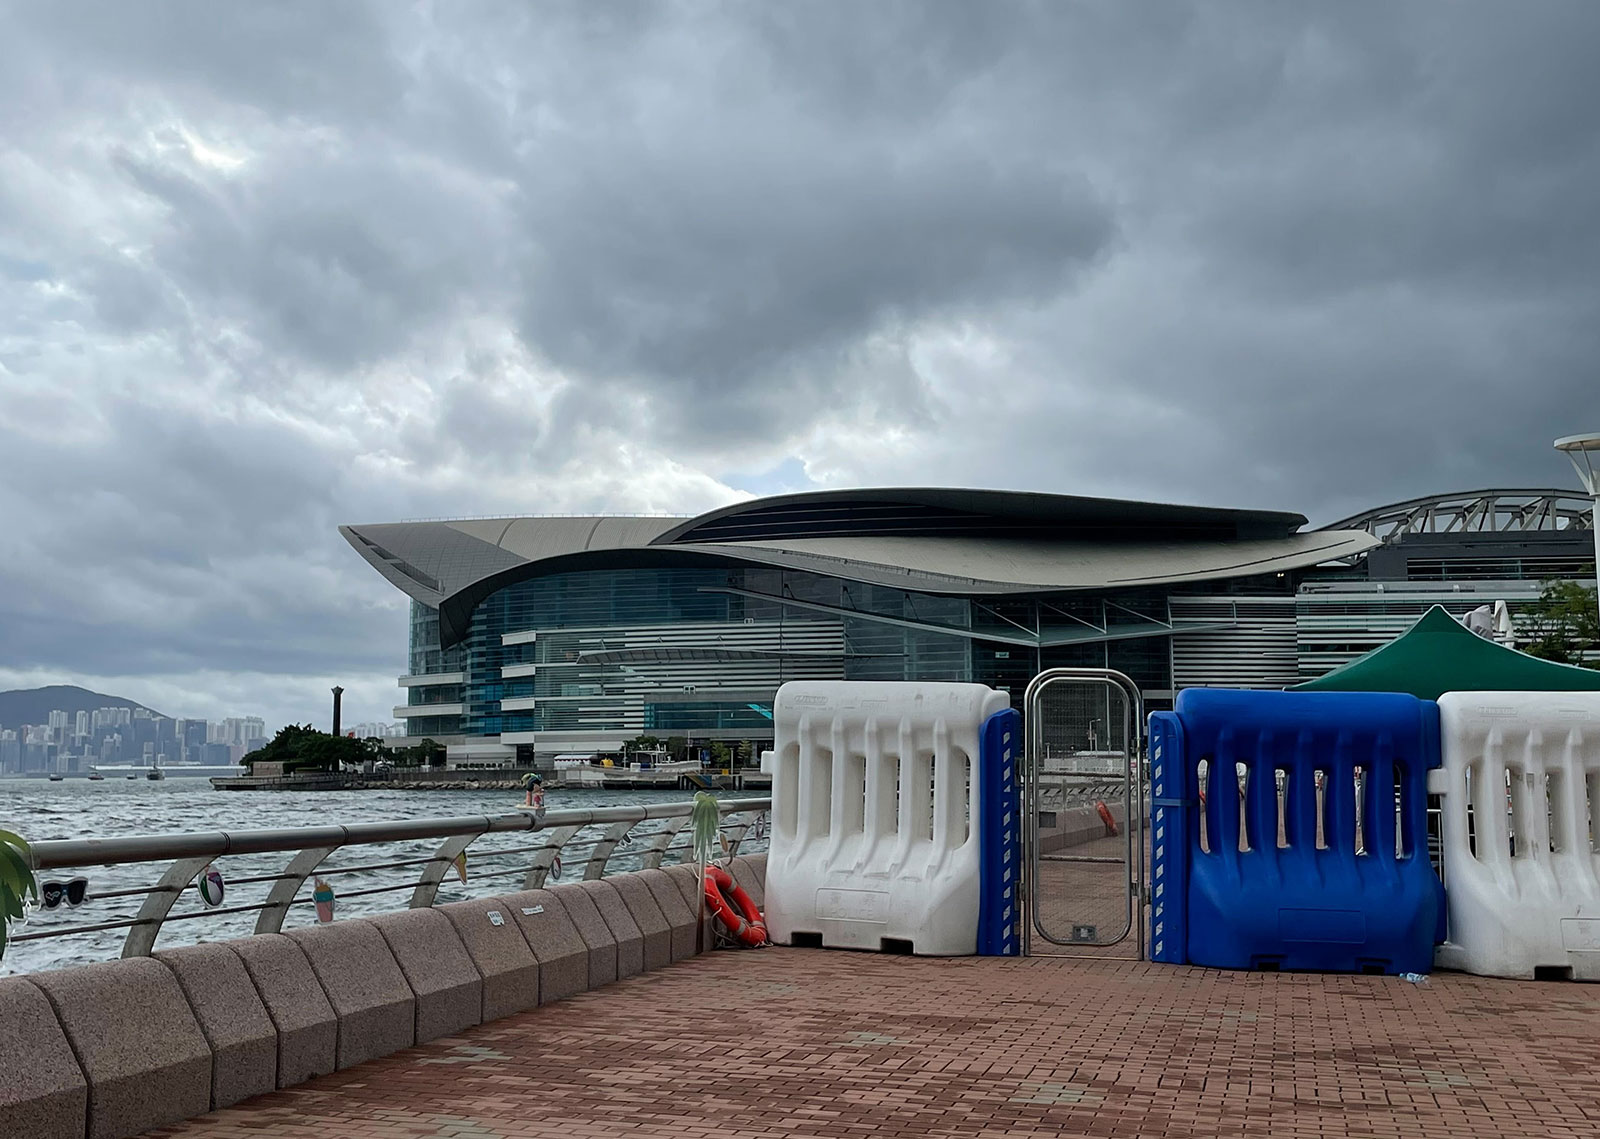 Roads, jogging paths and pedestrian bridges around the Hong Kong Convention and Exhibition Centre were closed ahead of ceremonies to mark the city's 25th handover anniversary on July 1, 2022.